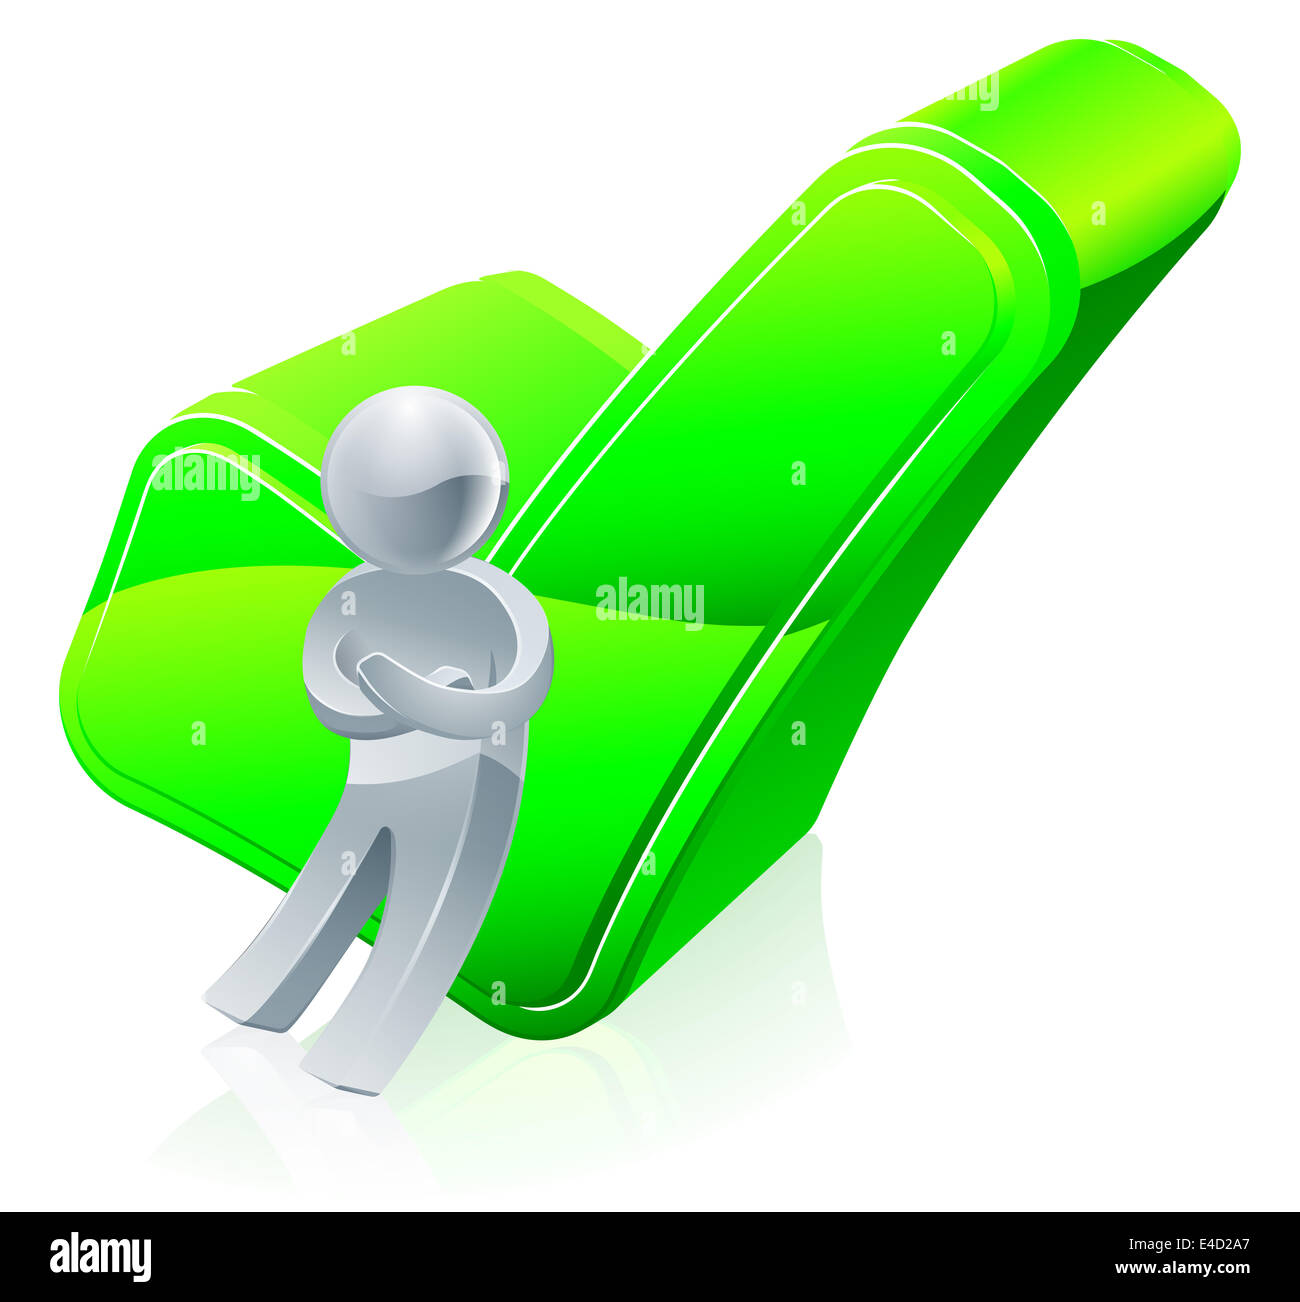 Tick silver person illustration of a silver mascot figure leaning on a big green tick icon Stock Photo